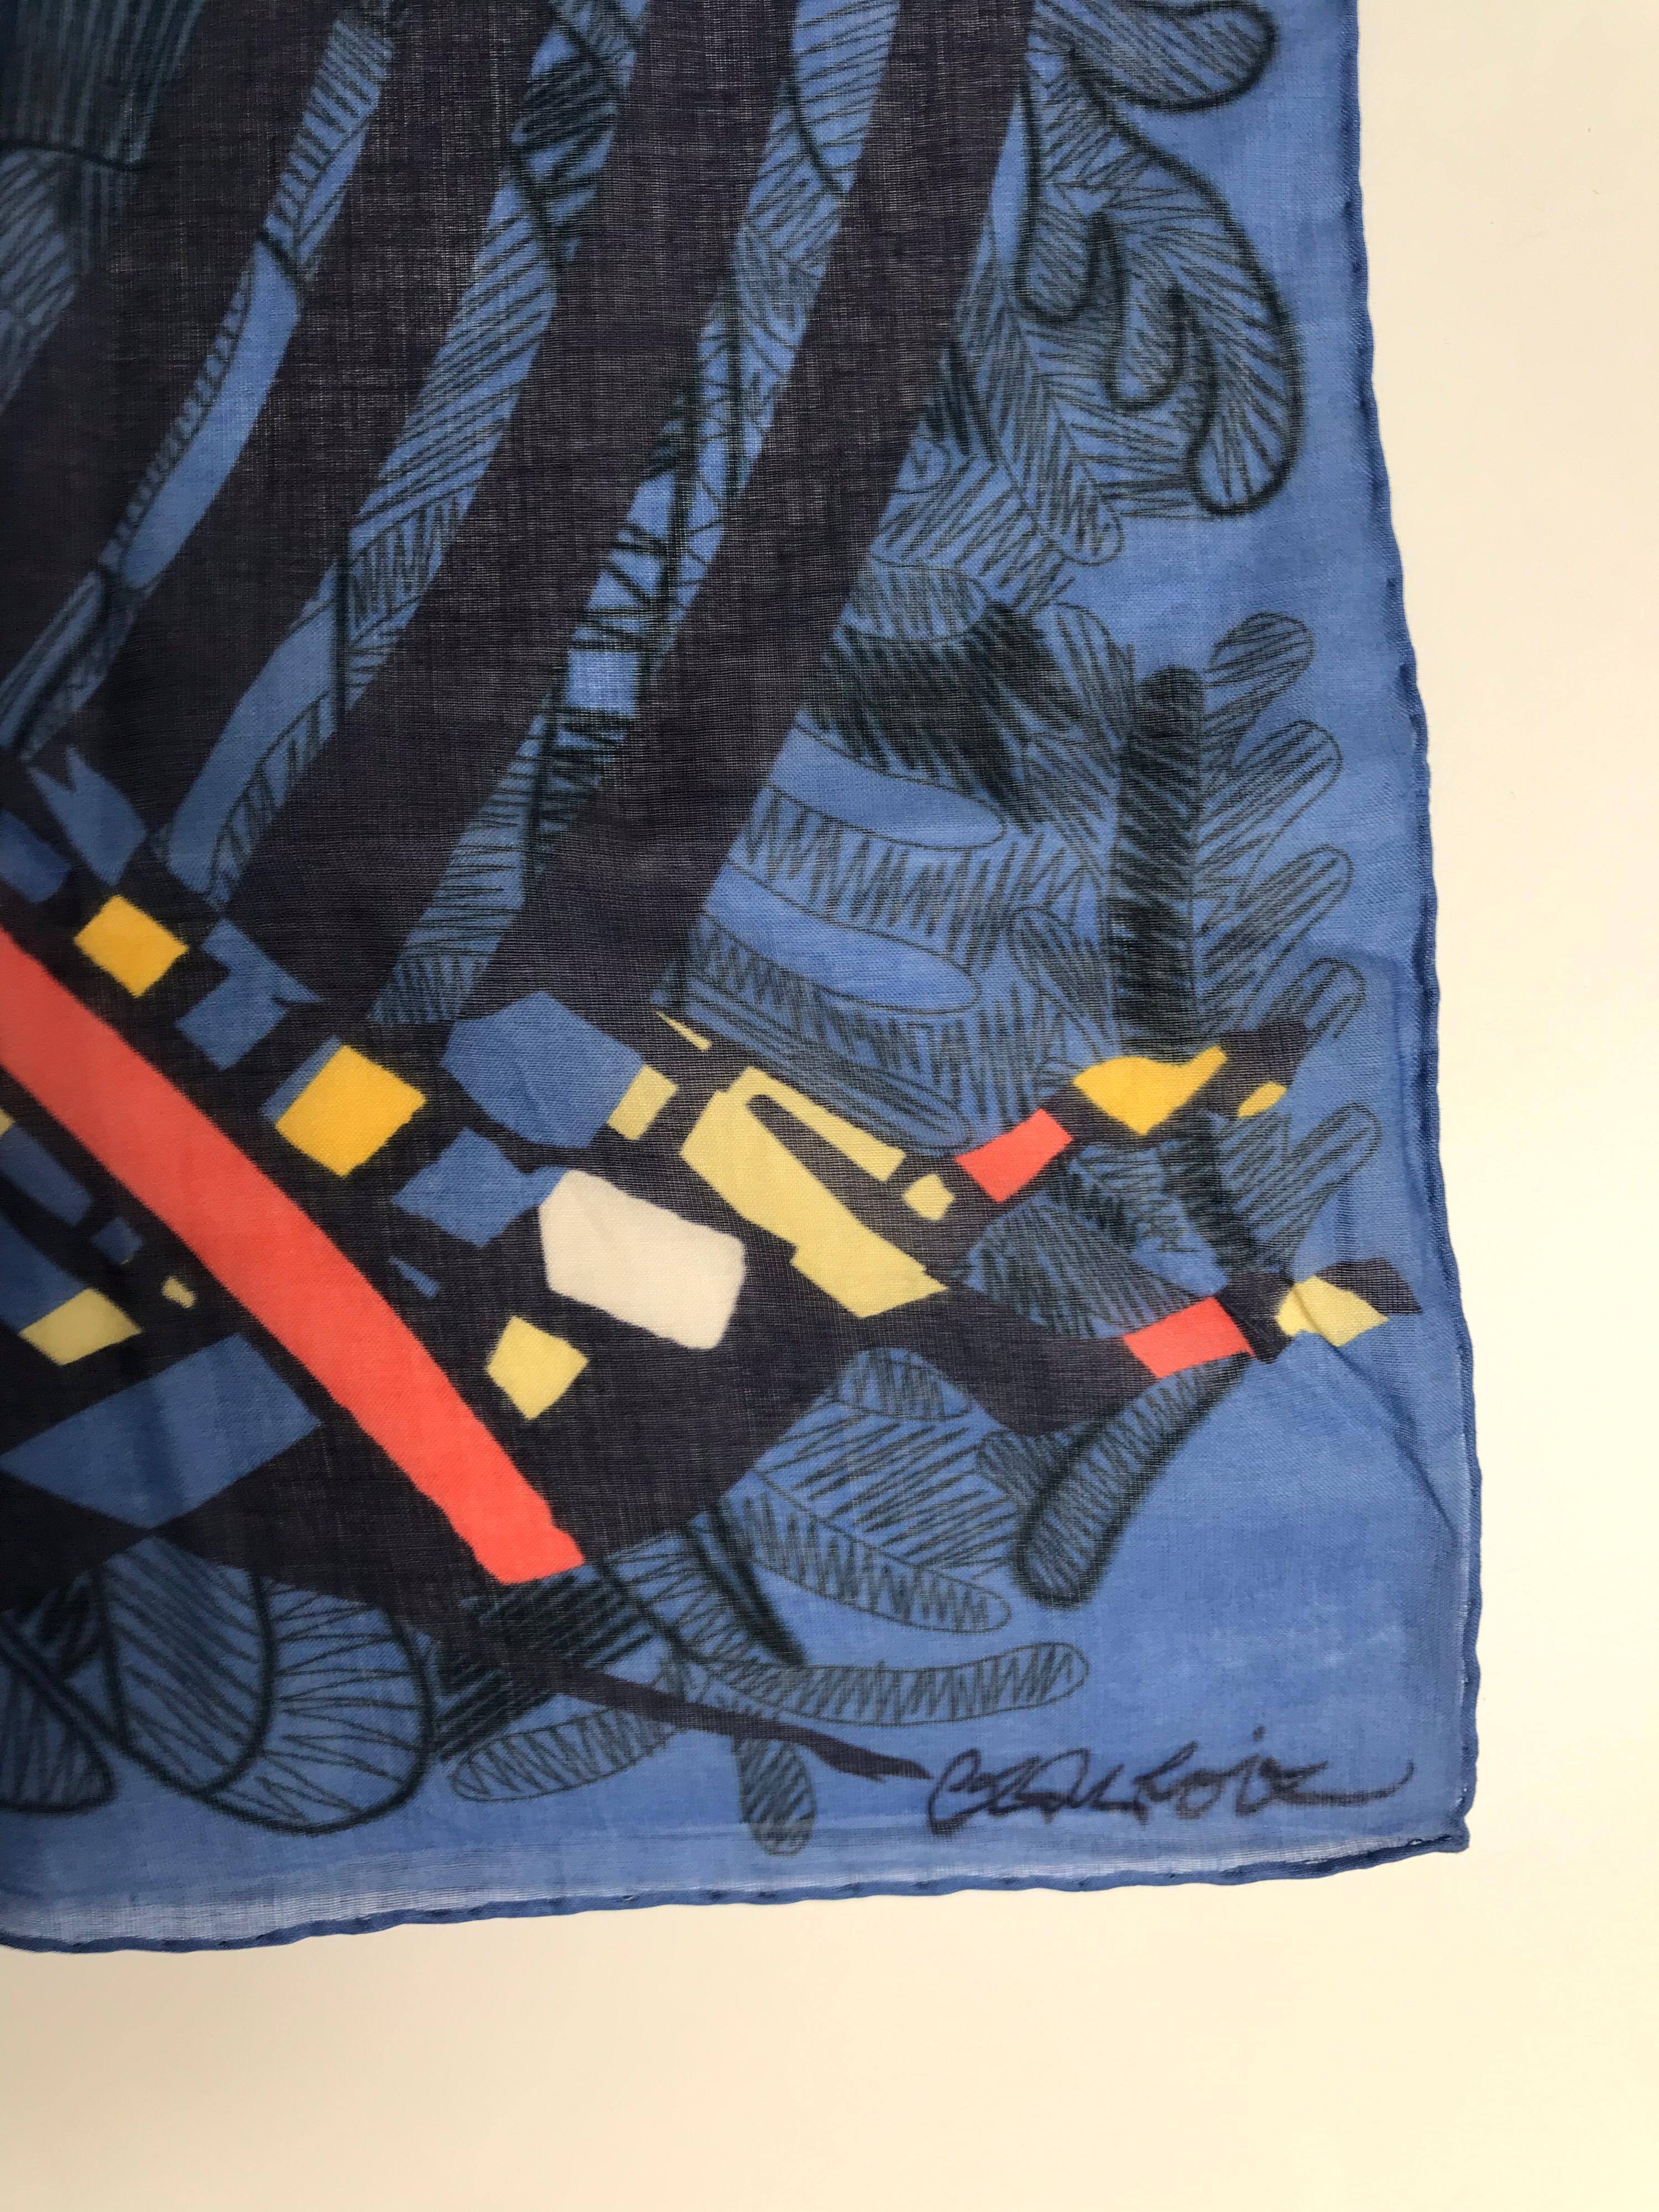 Slate and multicolor woven Christian Lacroix square scarf with abstract print throughout and rolled edges. Condition: Excellent.
Length: 22